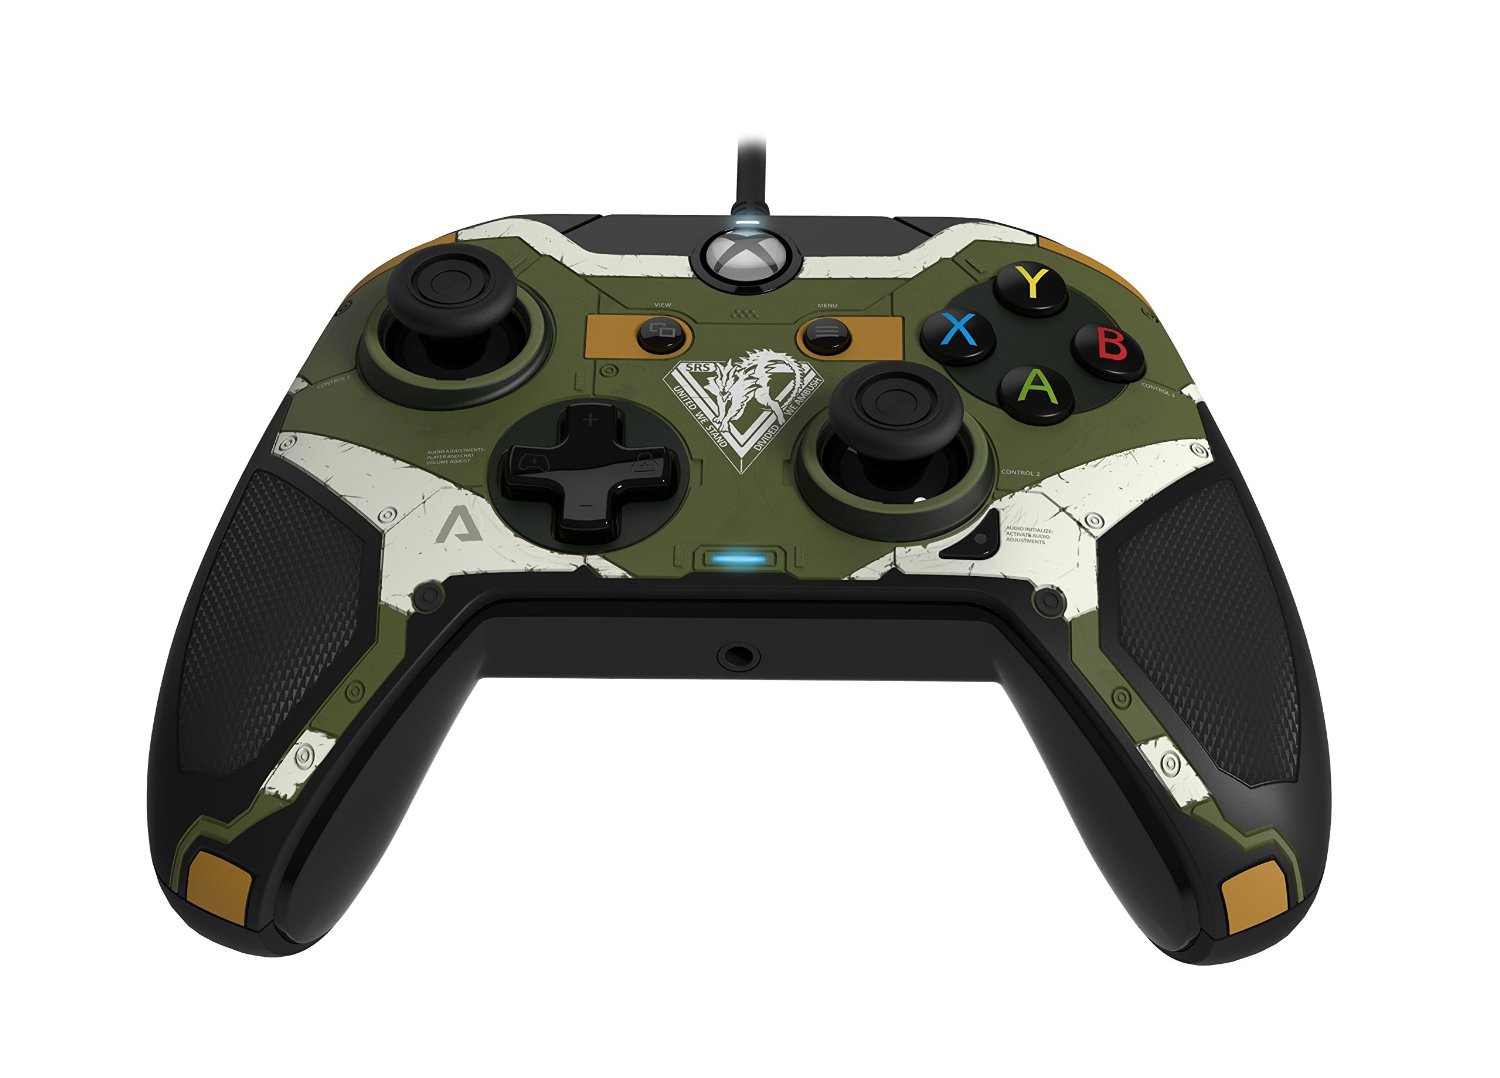 titanfall 2 pc ps4 controller